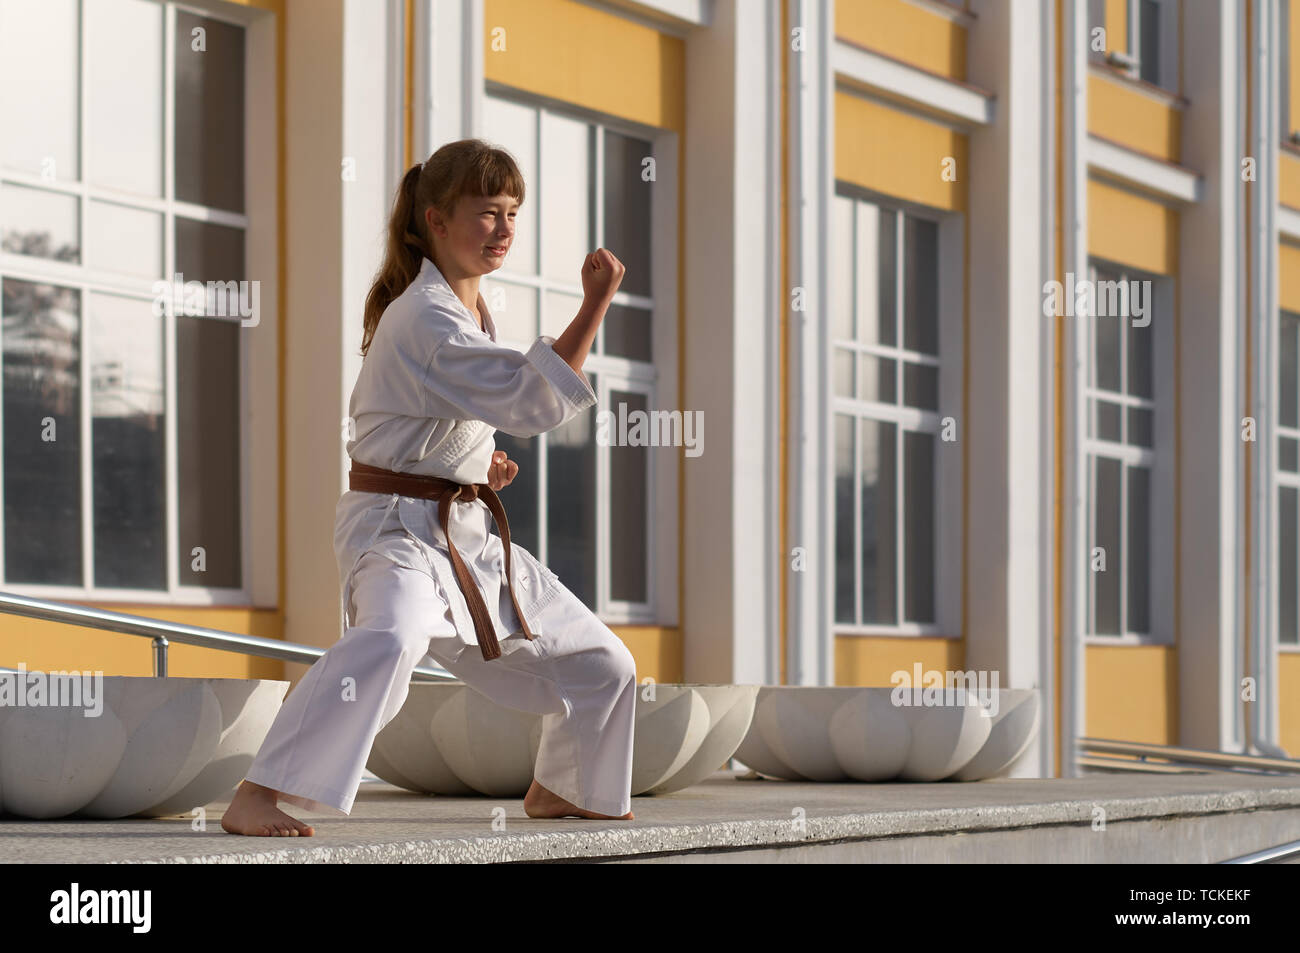 Young Woman in Kimono doing formal karate exercising on cityscape background Stock Photo